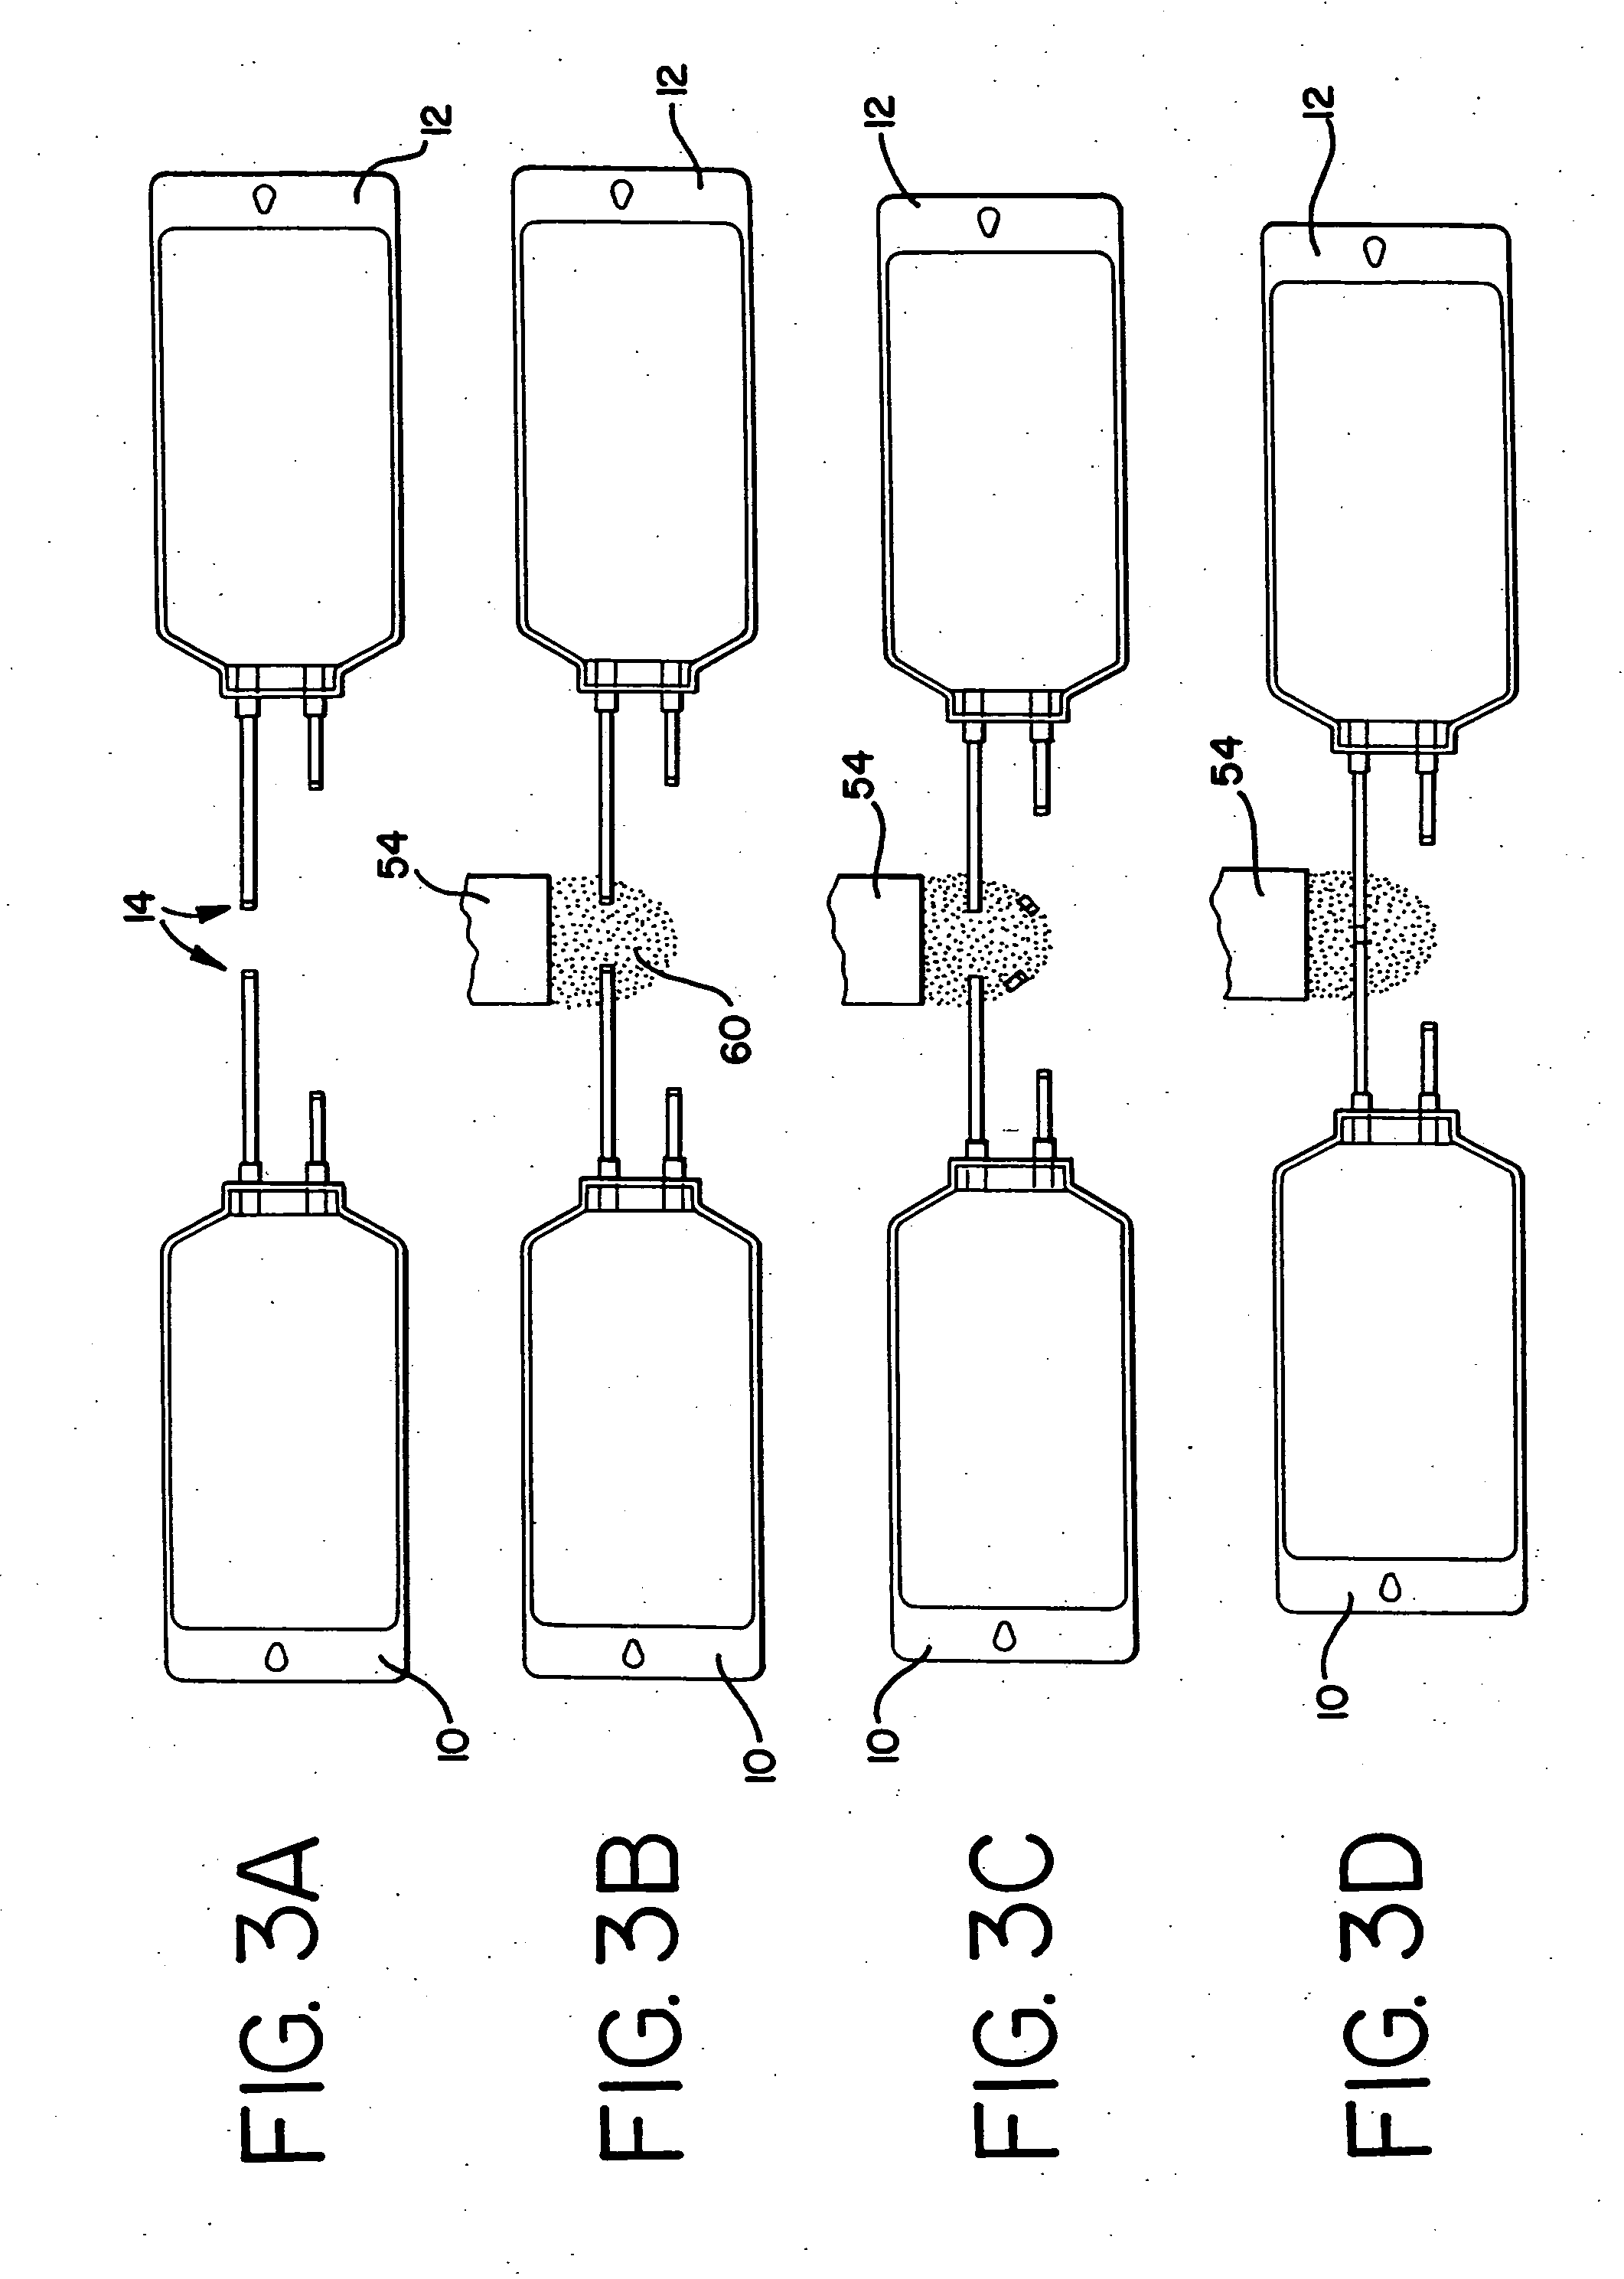 Apparatus for manipulating pre-sterilized components in an active sterile field